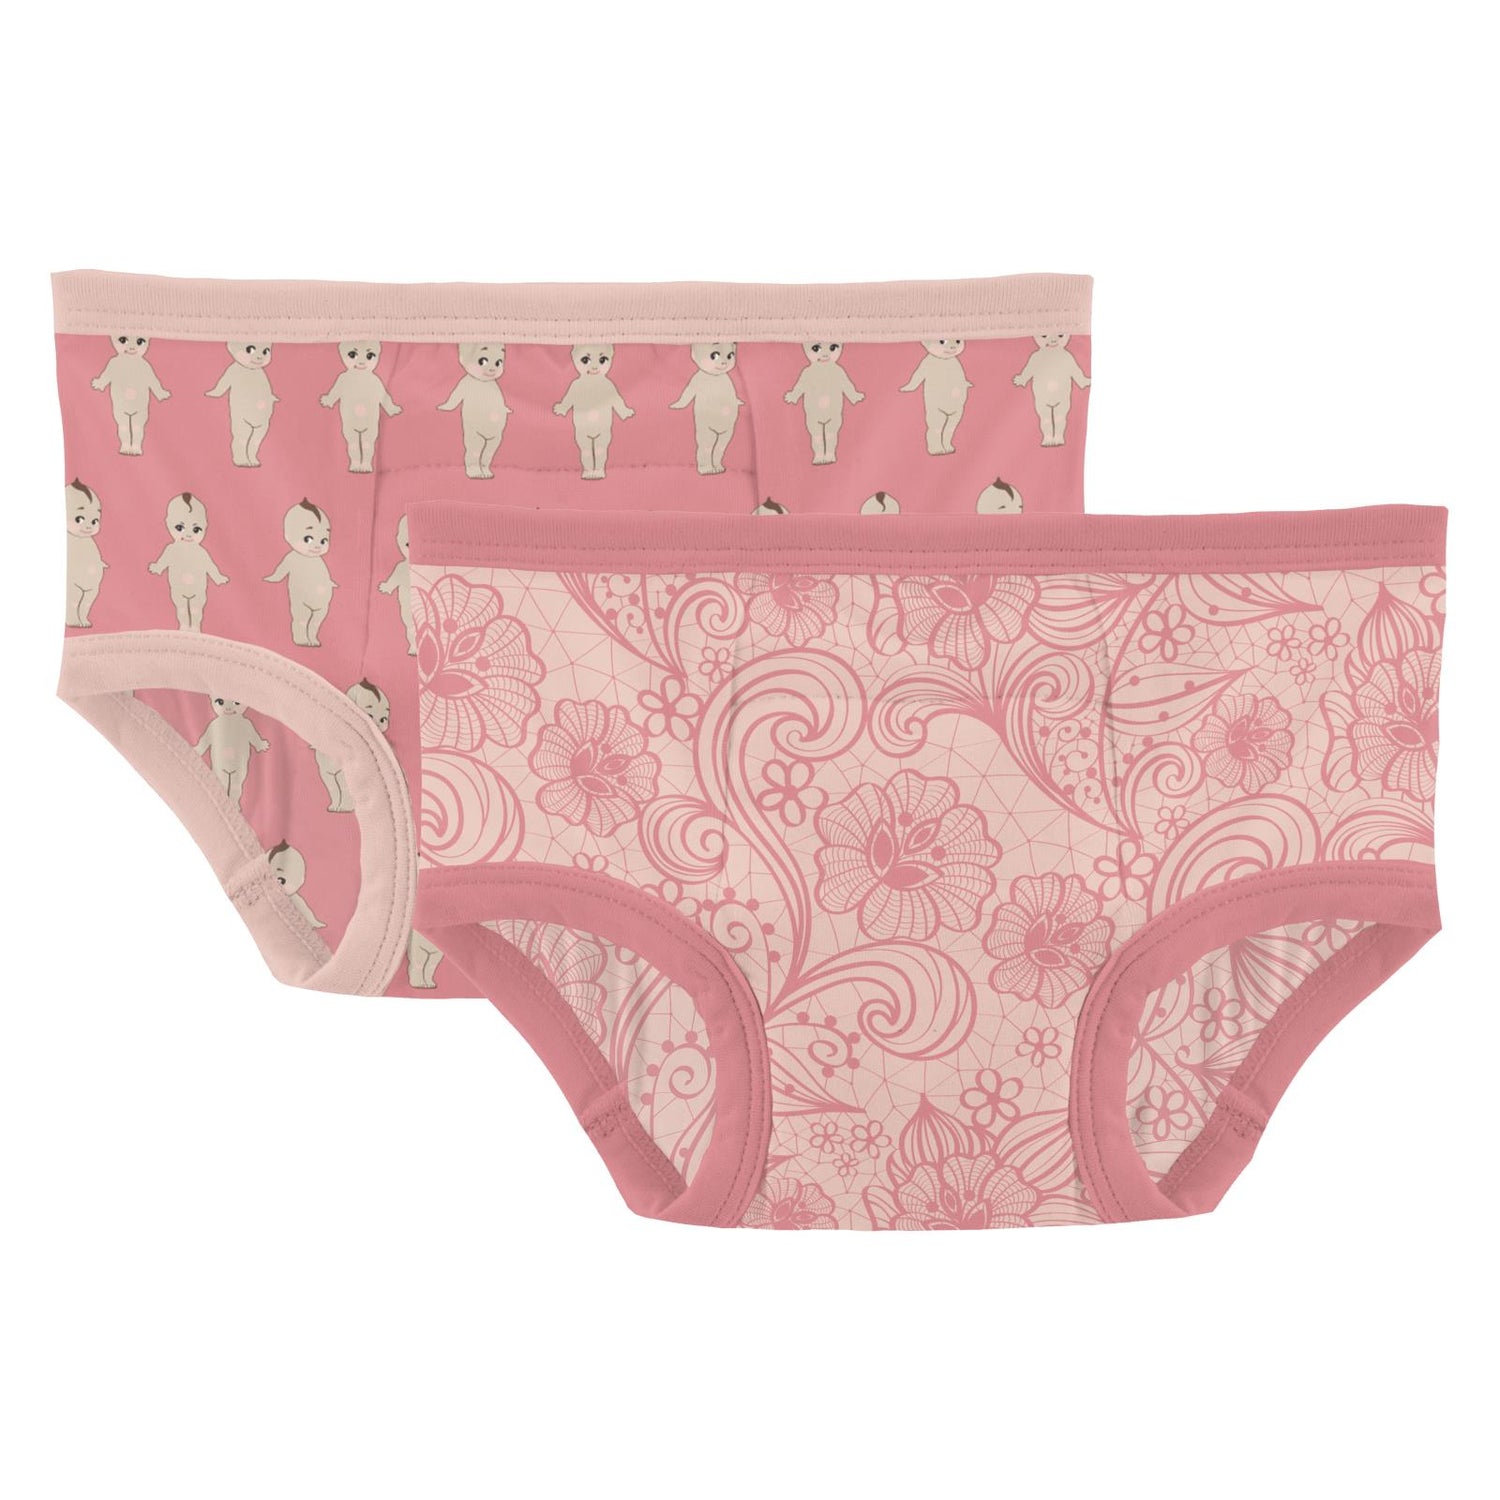 Print Training Pants Set of 2 in Desert Rose Baby Doll & Peach Blossom Lace